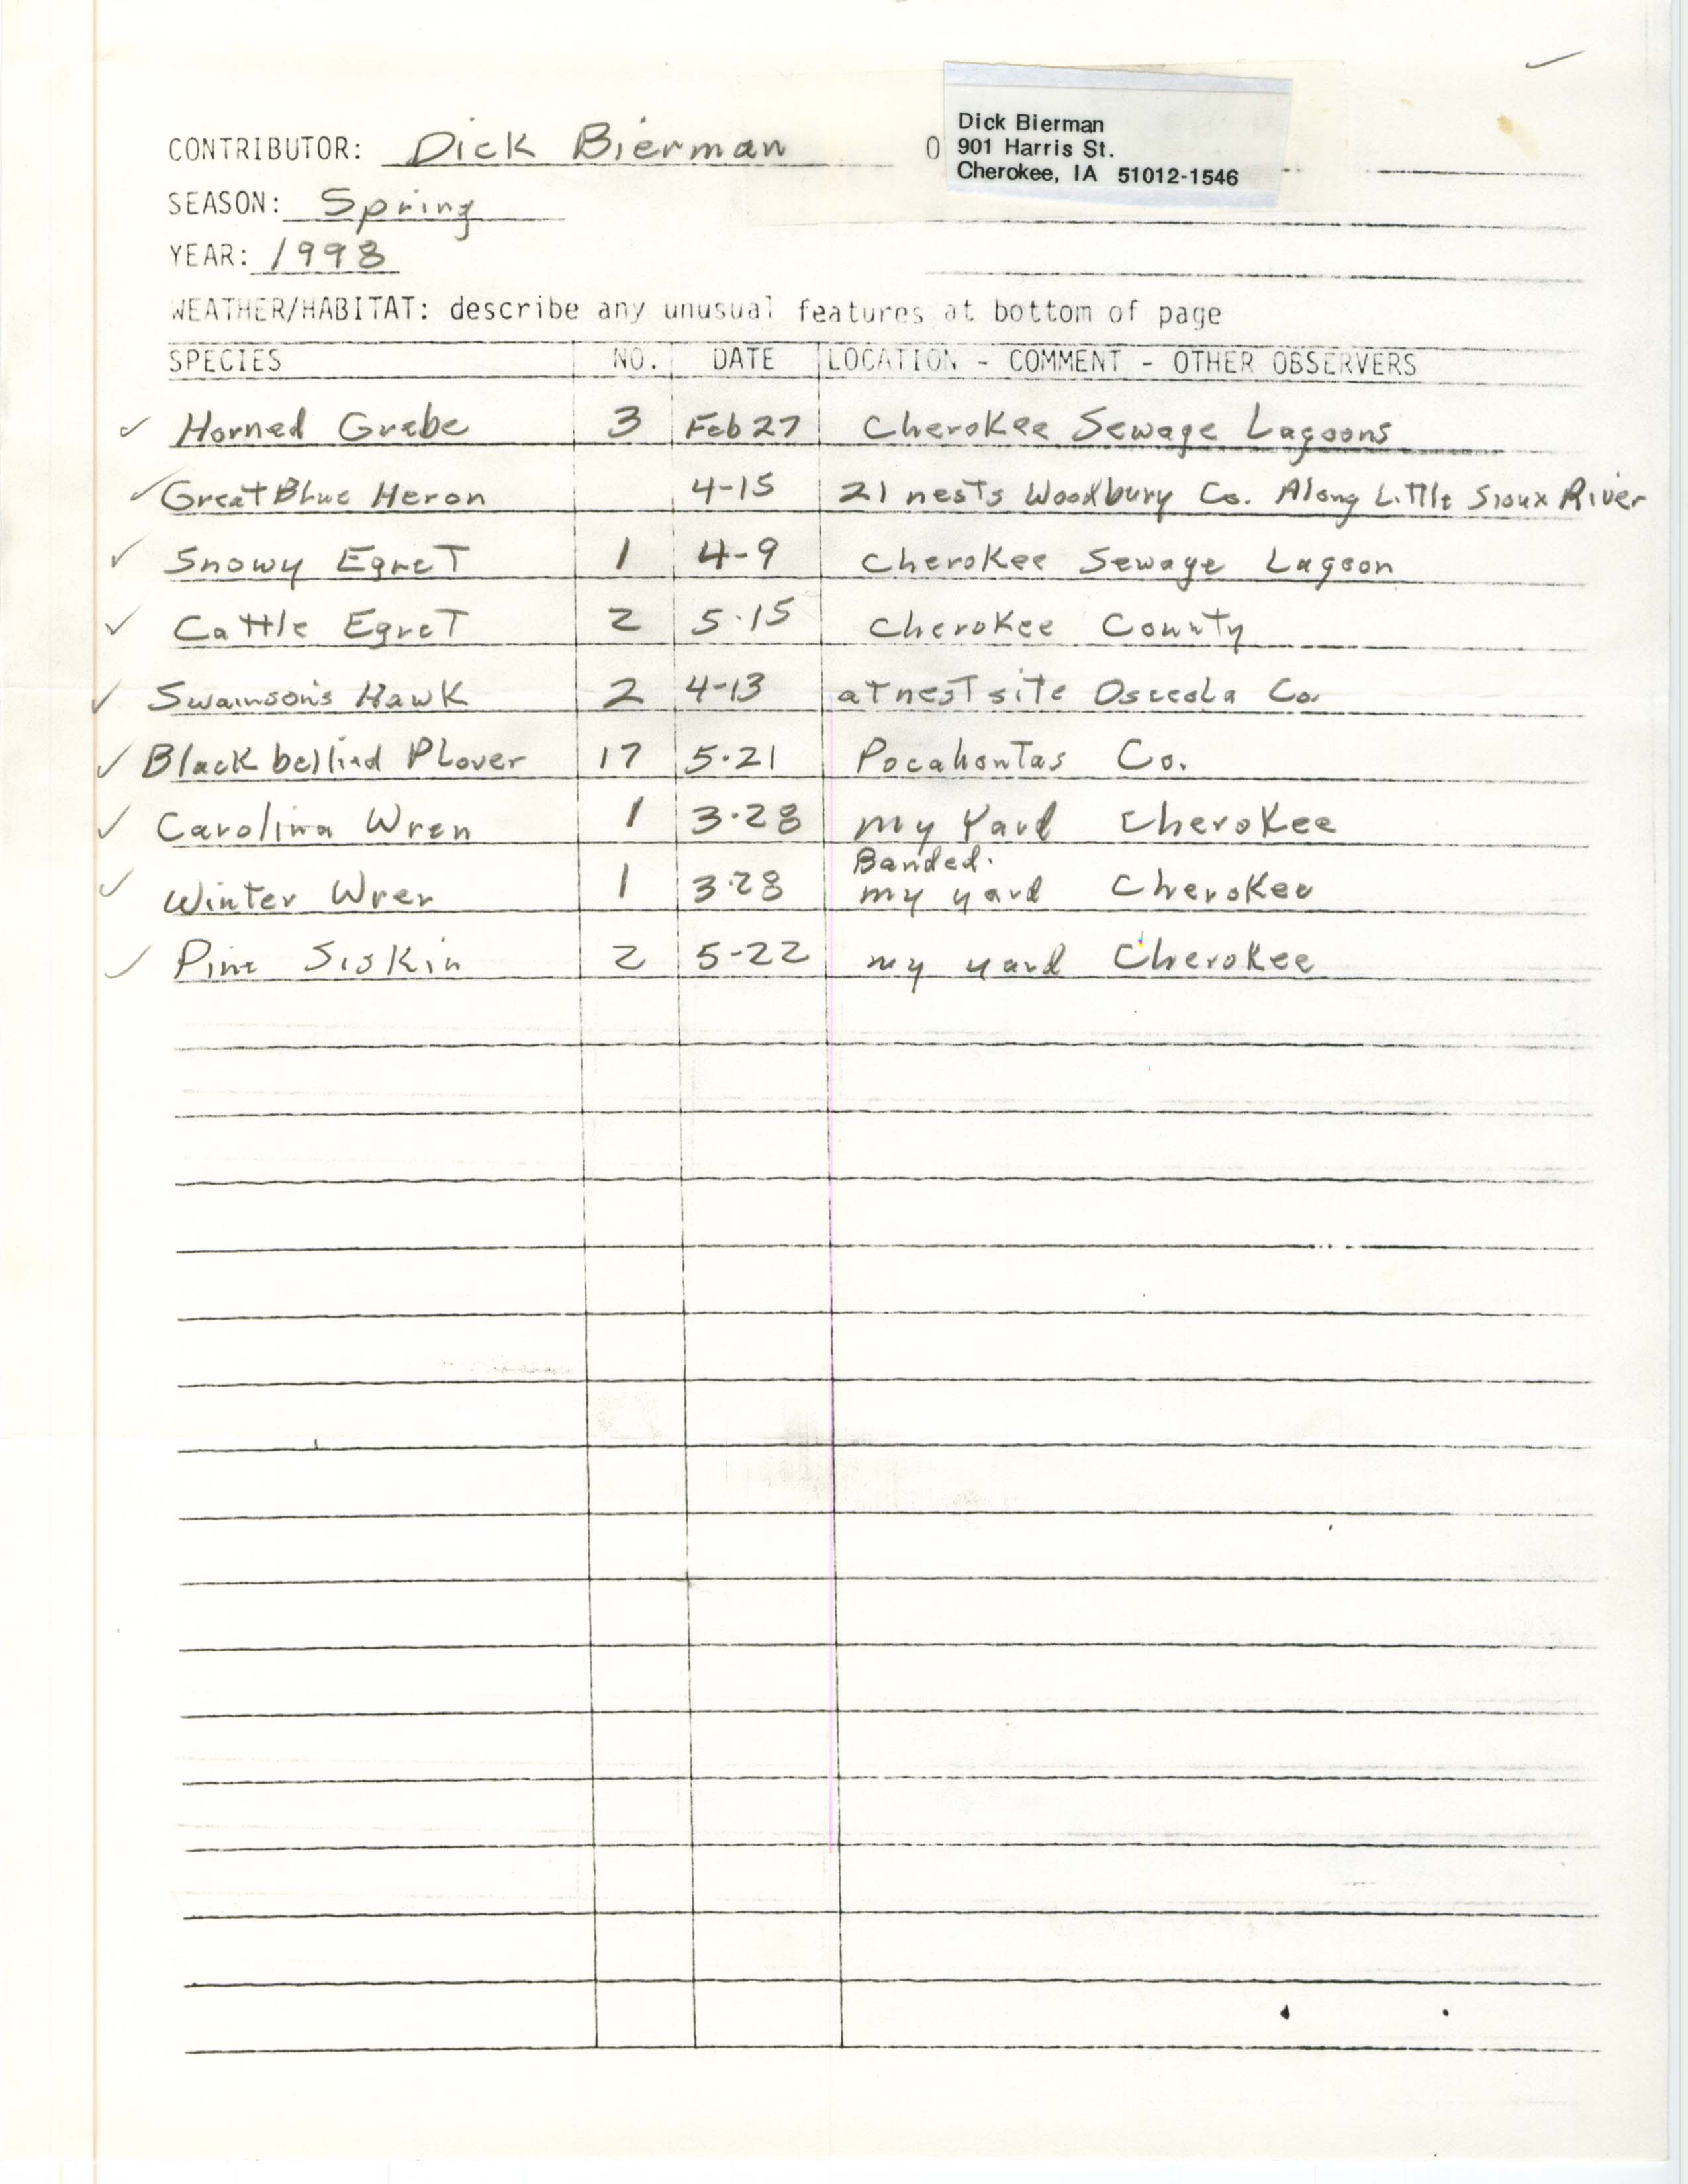 Field reports form for submitting seasonal observations of Iowa birds, Dick Bierman, spring 1998